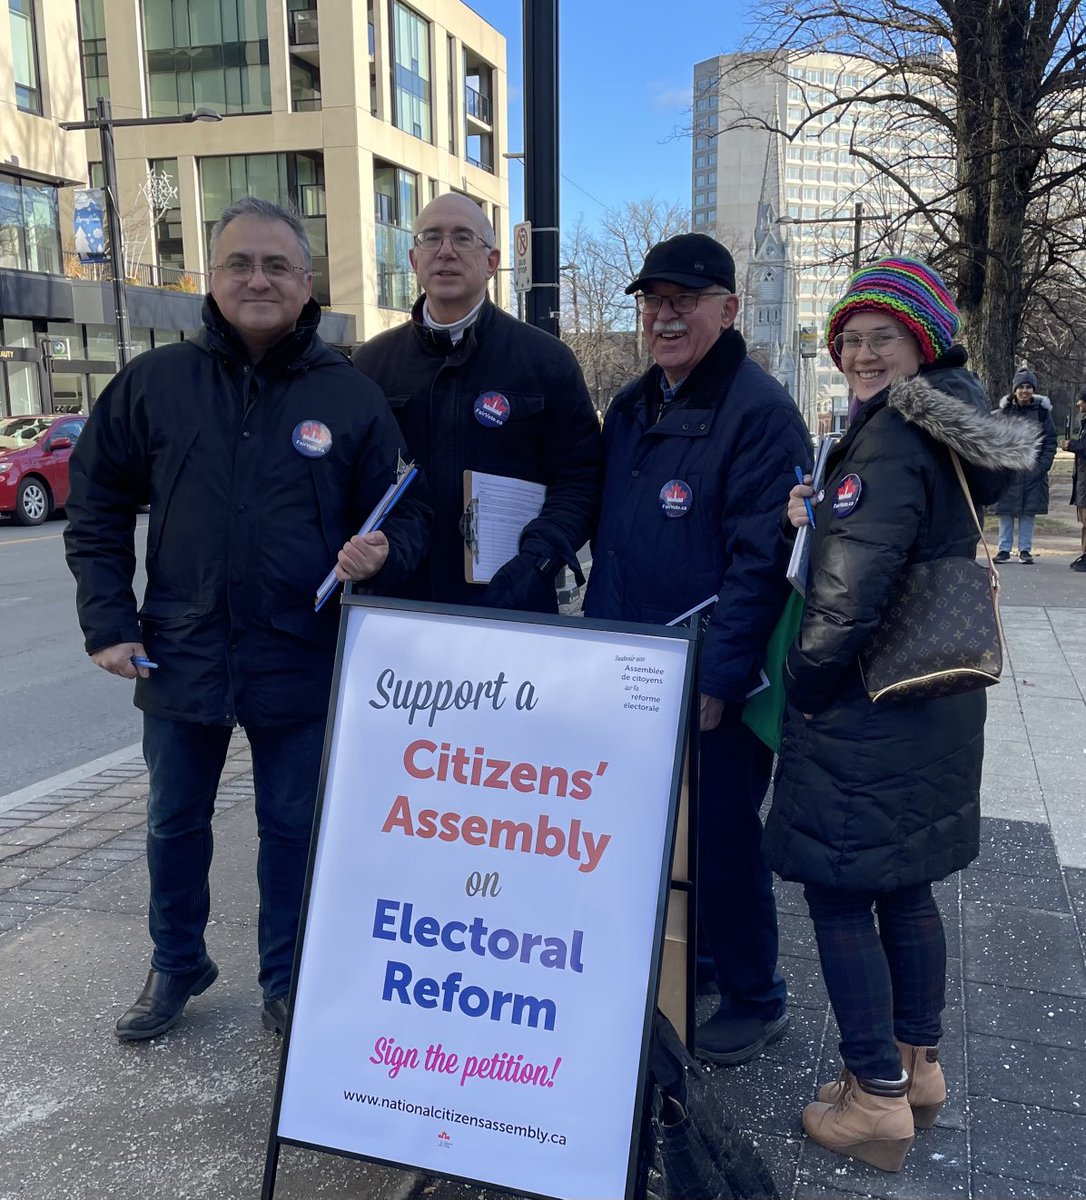 Volunteers collecting signatures today in downtown #Halifax in support of M-86 for a natl #CitizensAssembly on #electoralreform …Hoping MP ⁦@AndyFillmoreHFX⁩ can present the petition in Parliament #cdnpoli ⁦@FairVoteCanada⁩ ⁦@LisaMarieBarron⁩